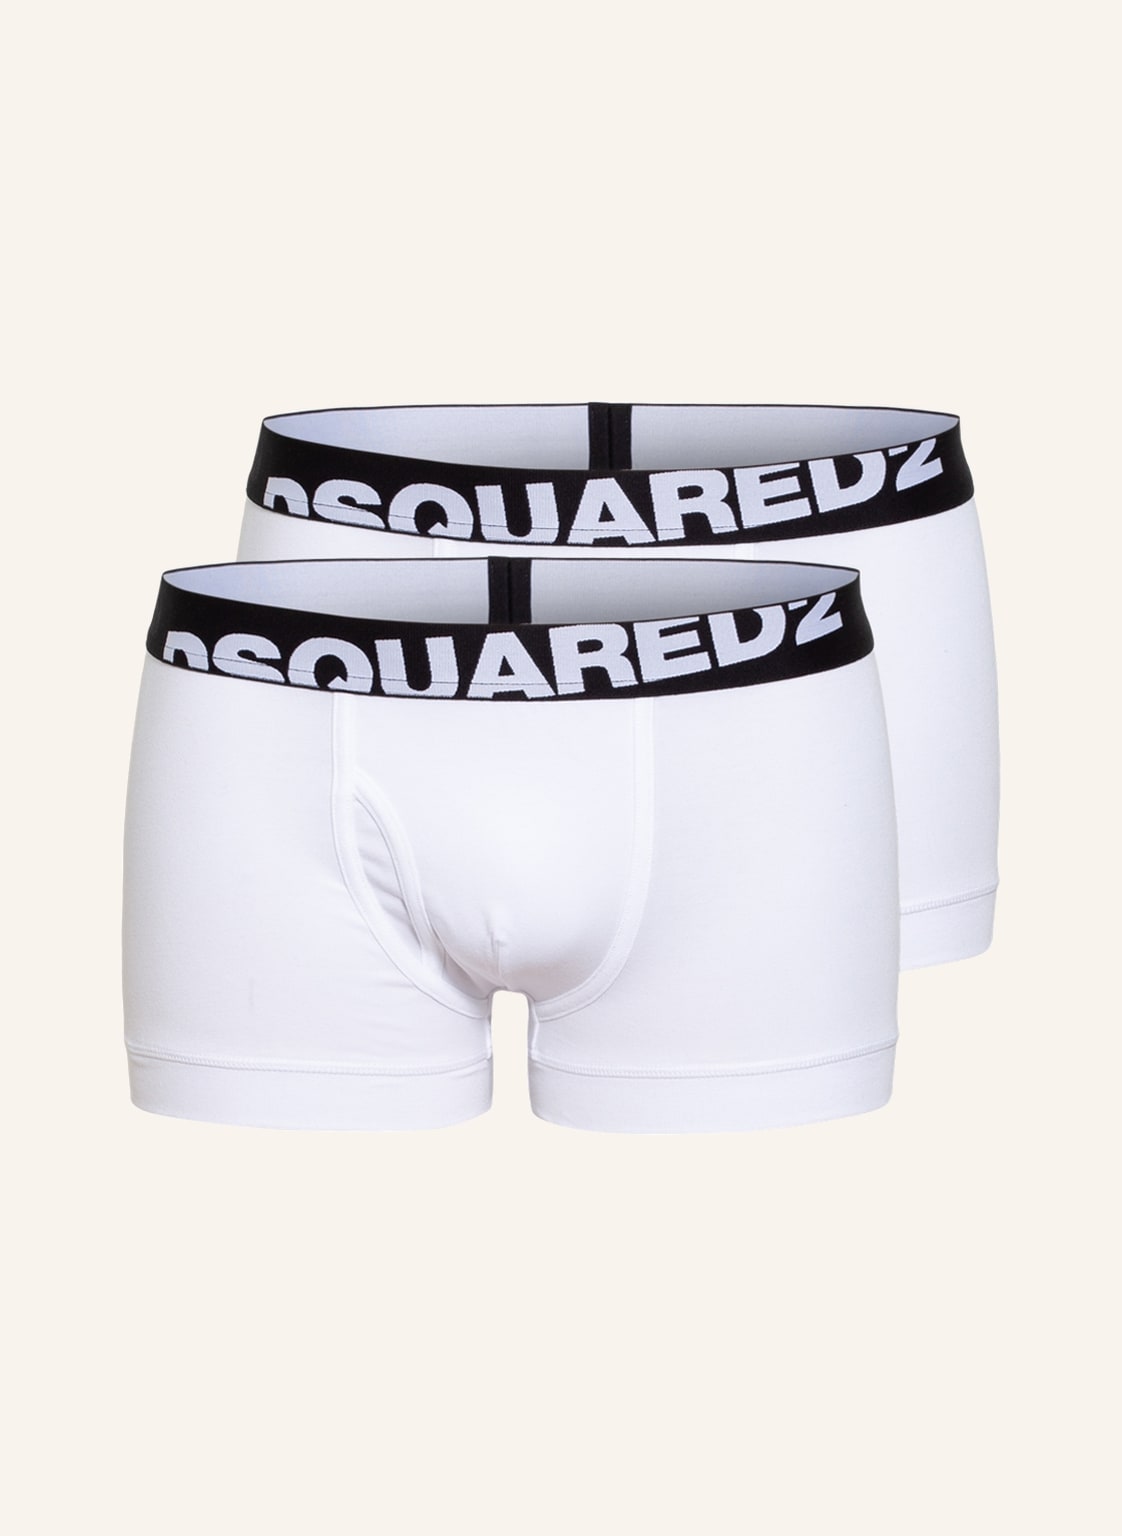 dsquared2 2er-Pack Boxershorts weiss von Dsquared2